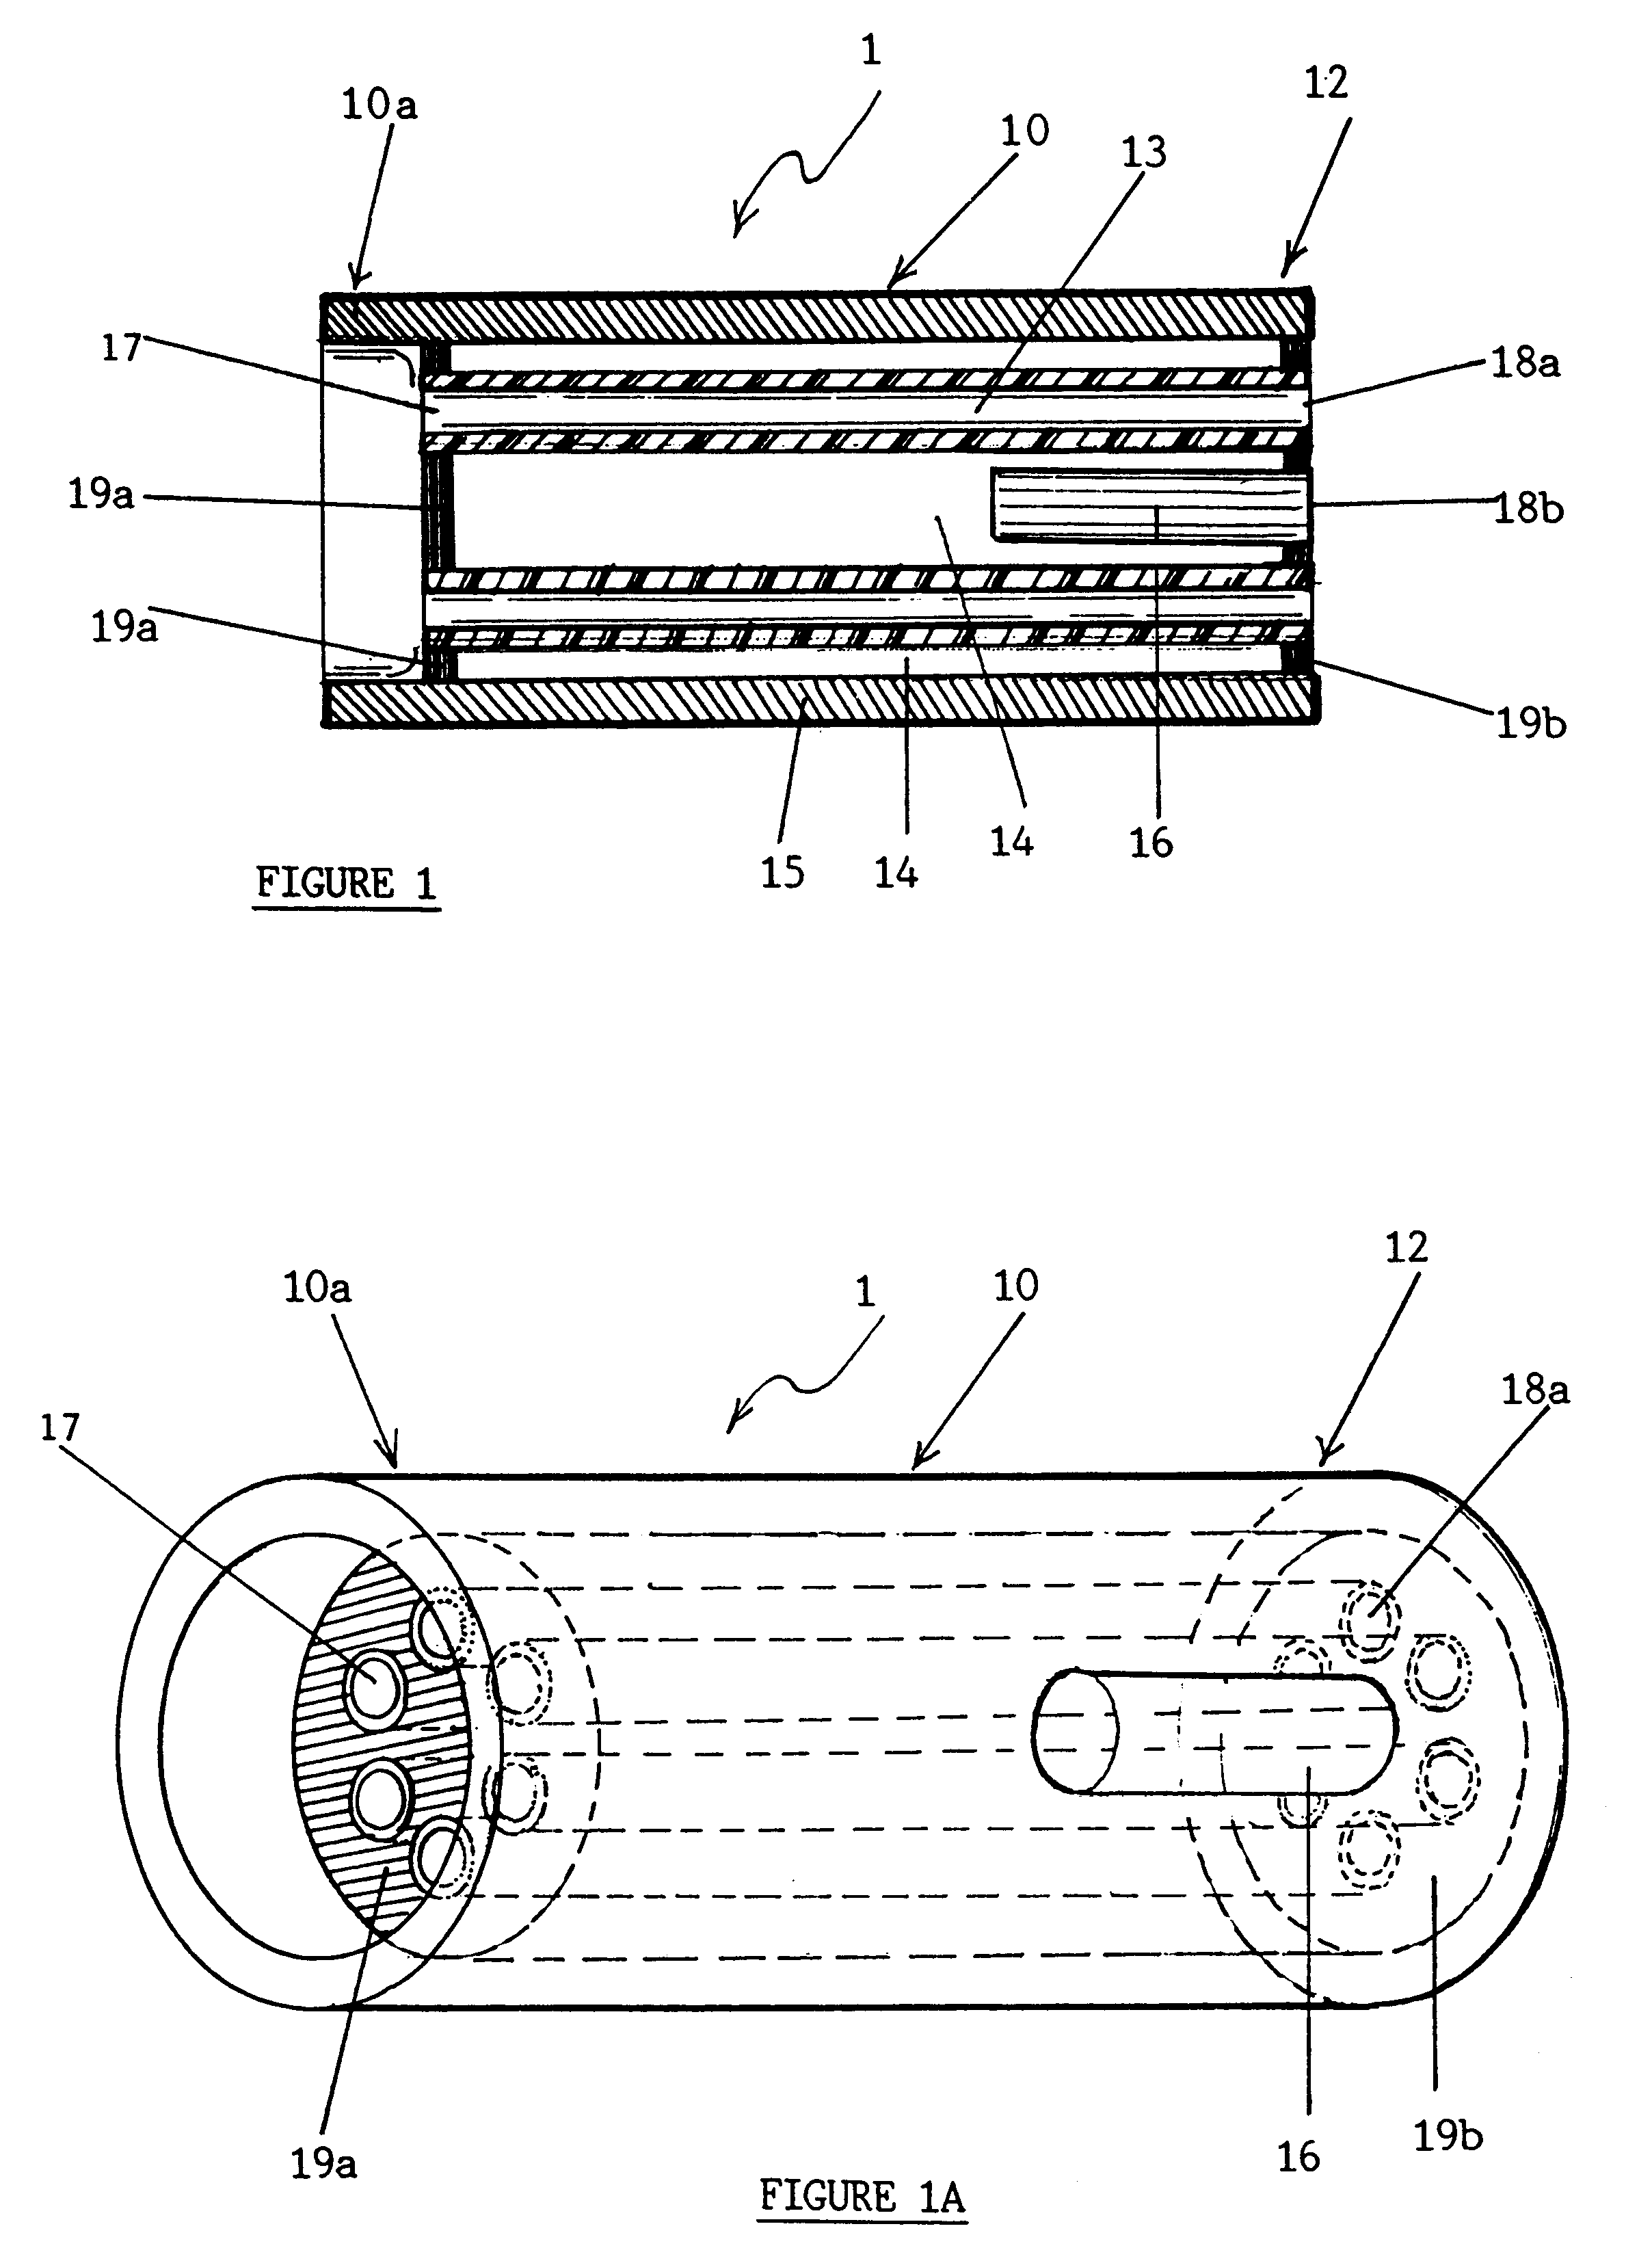 Filter for secondary smoke and smoking articles incorporating the same